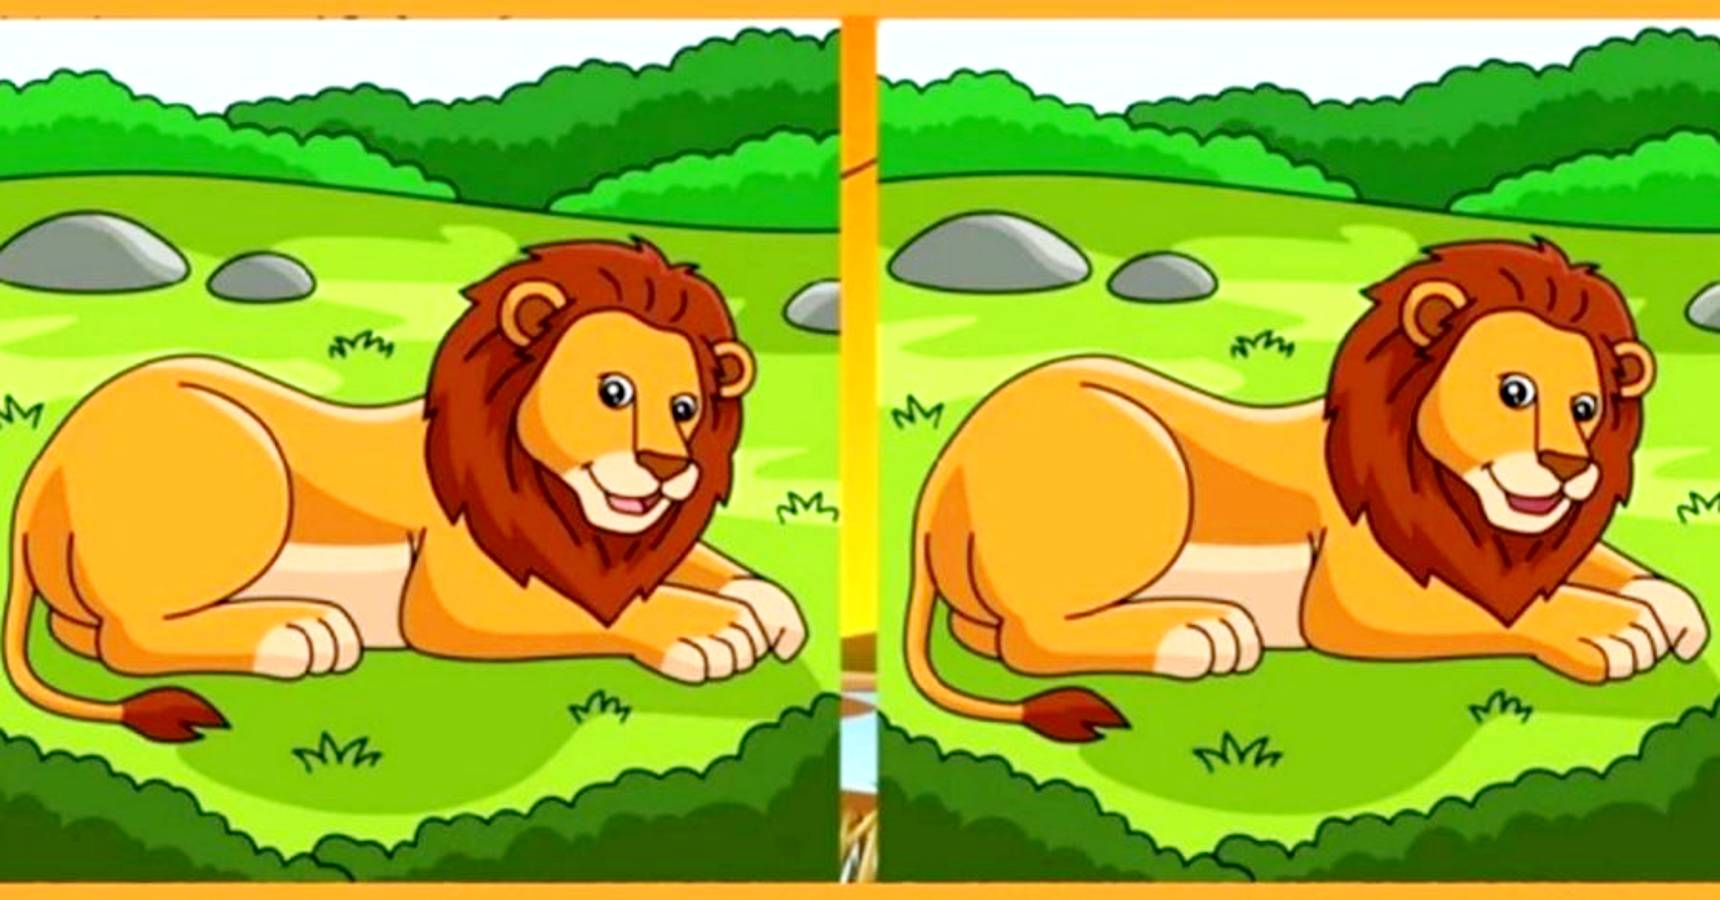 Optical illusion can you spot 3 differences between the two lions within 10 seconds